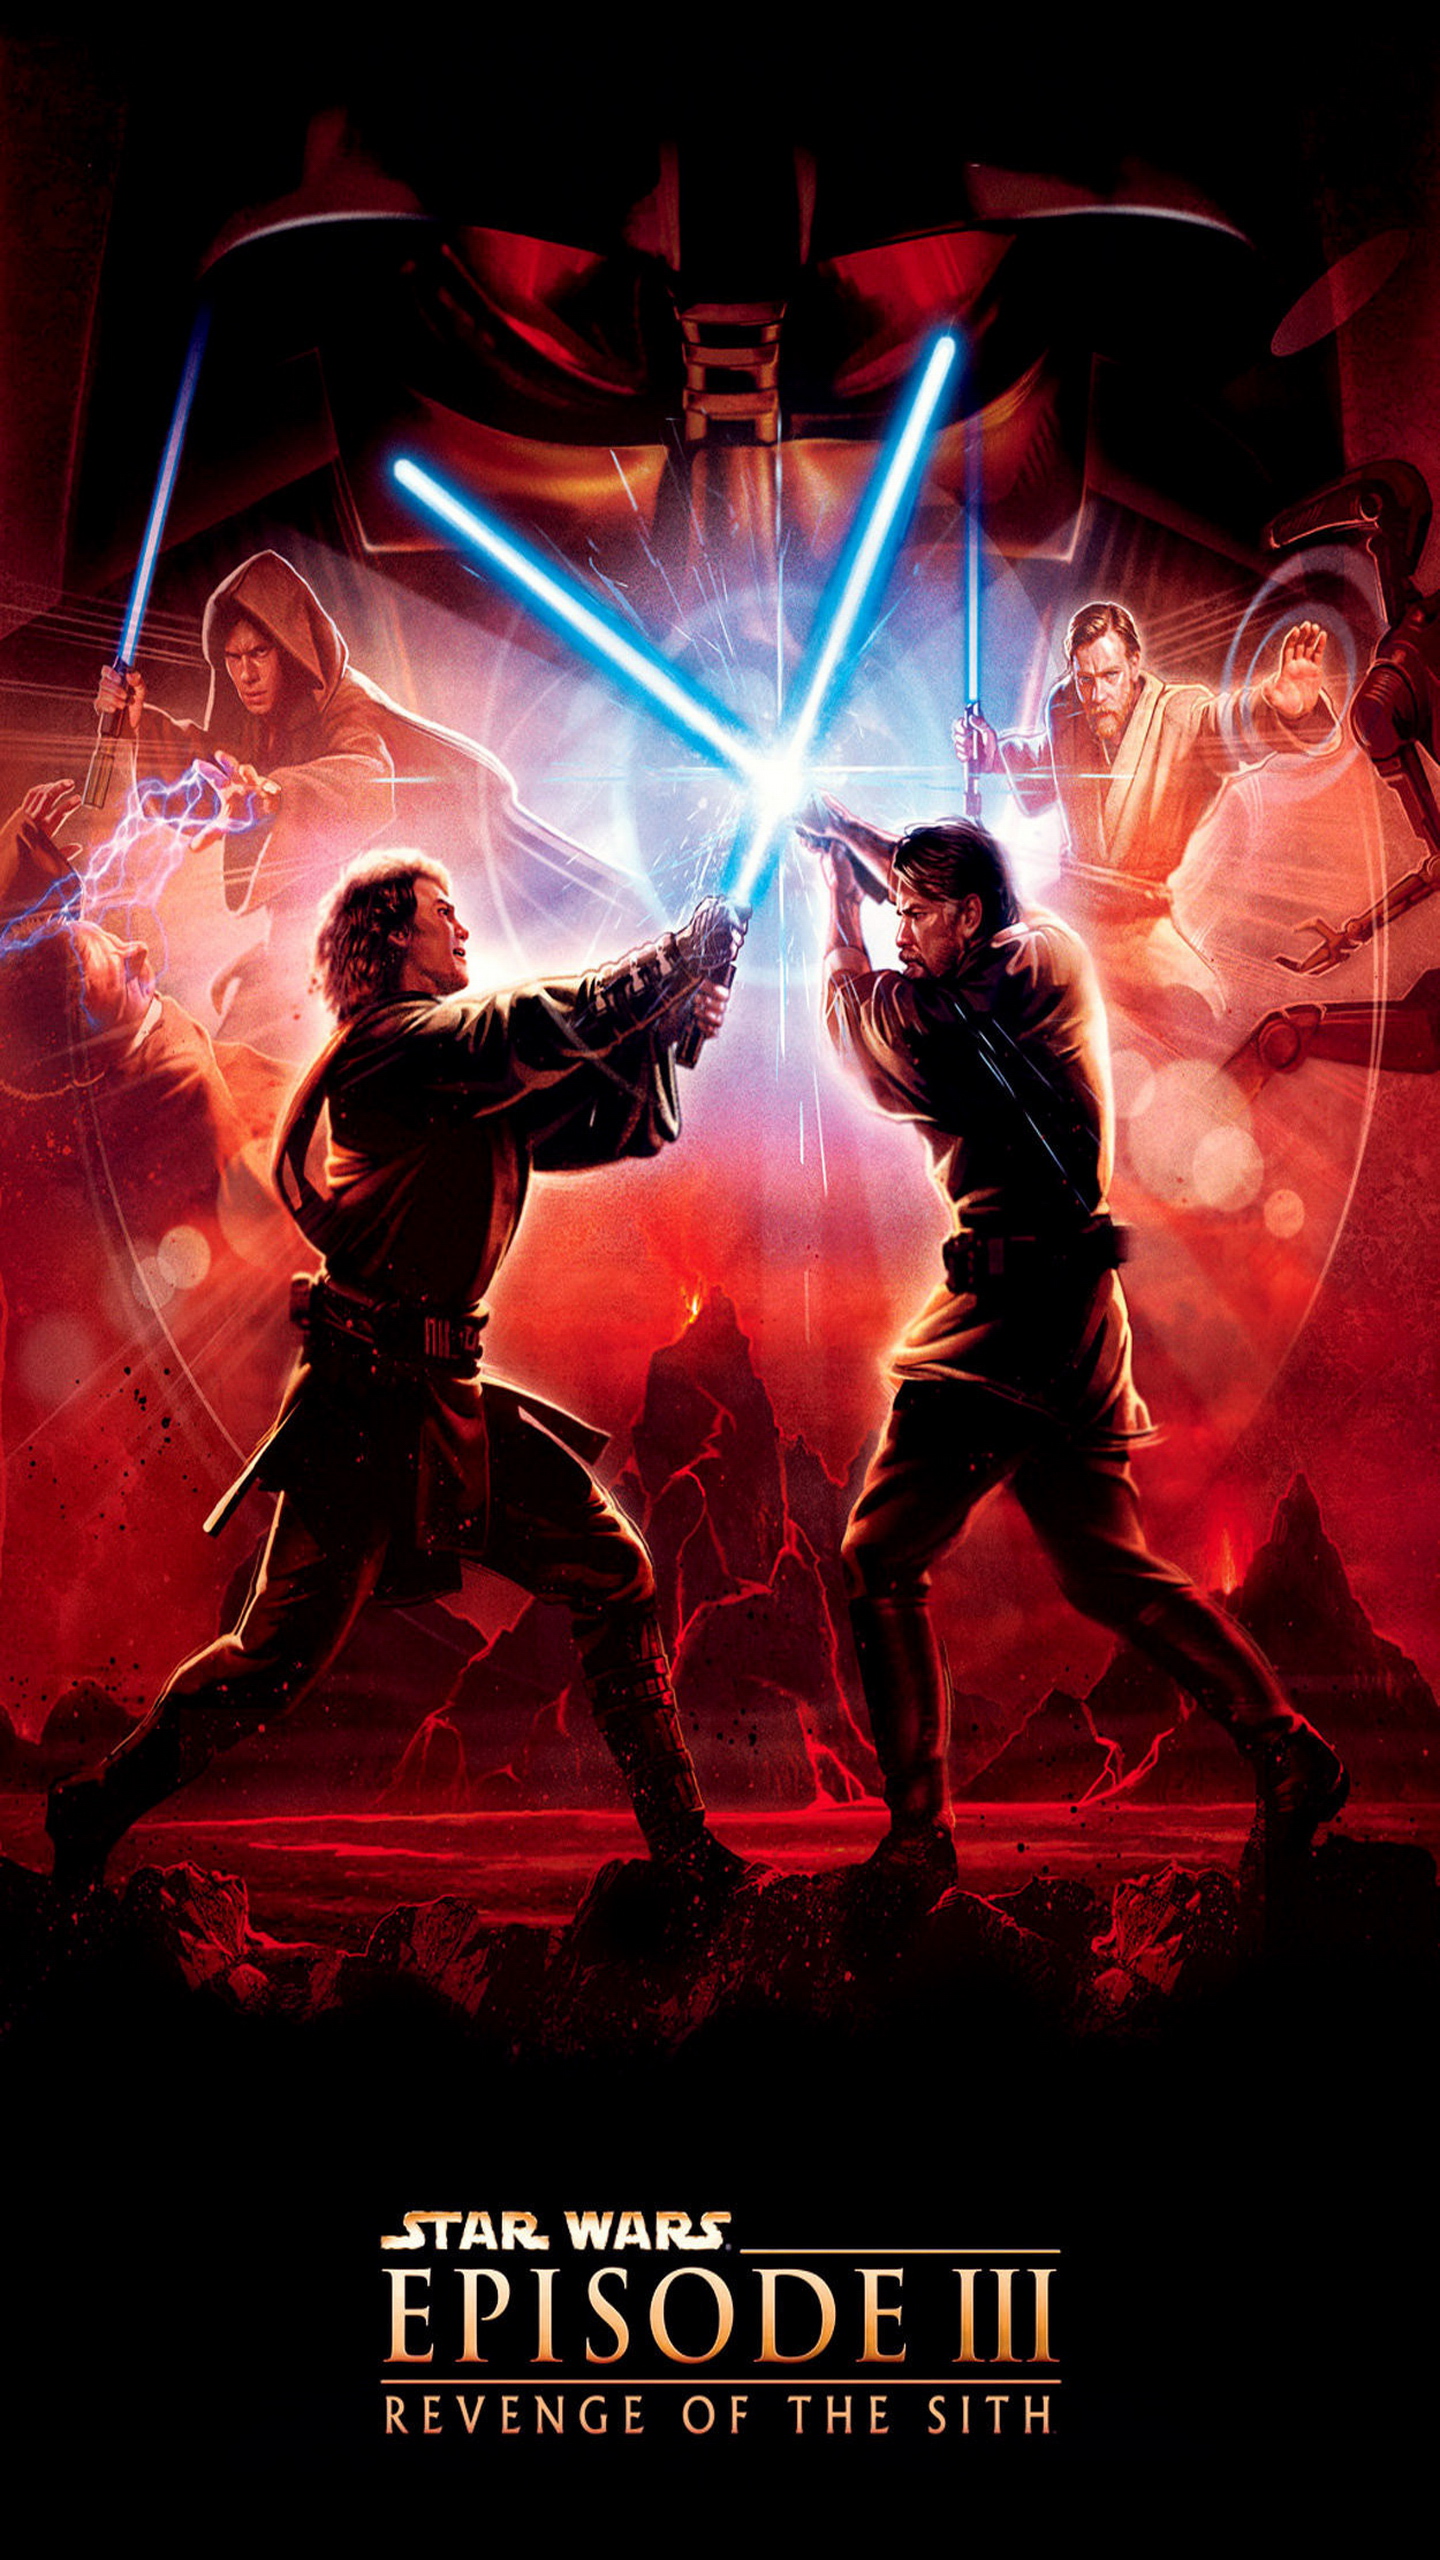 Star Wars Episode Iii Revenge Of The Sith Galaxy Note Wallpaper